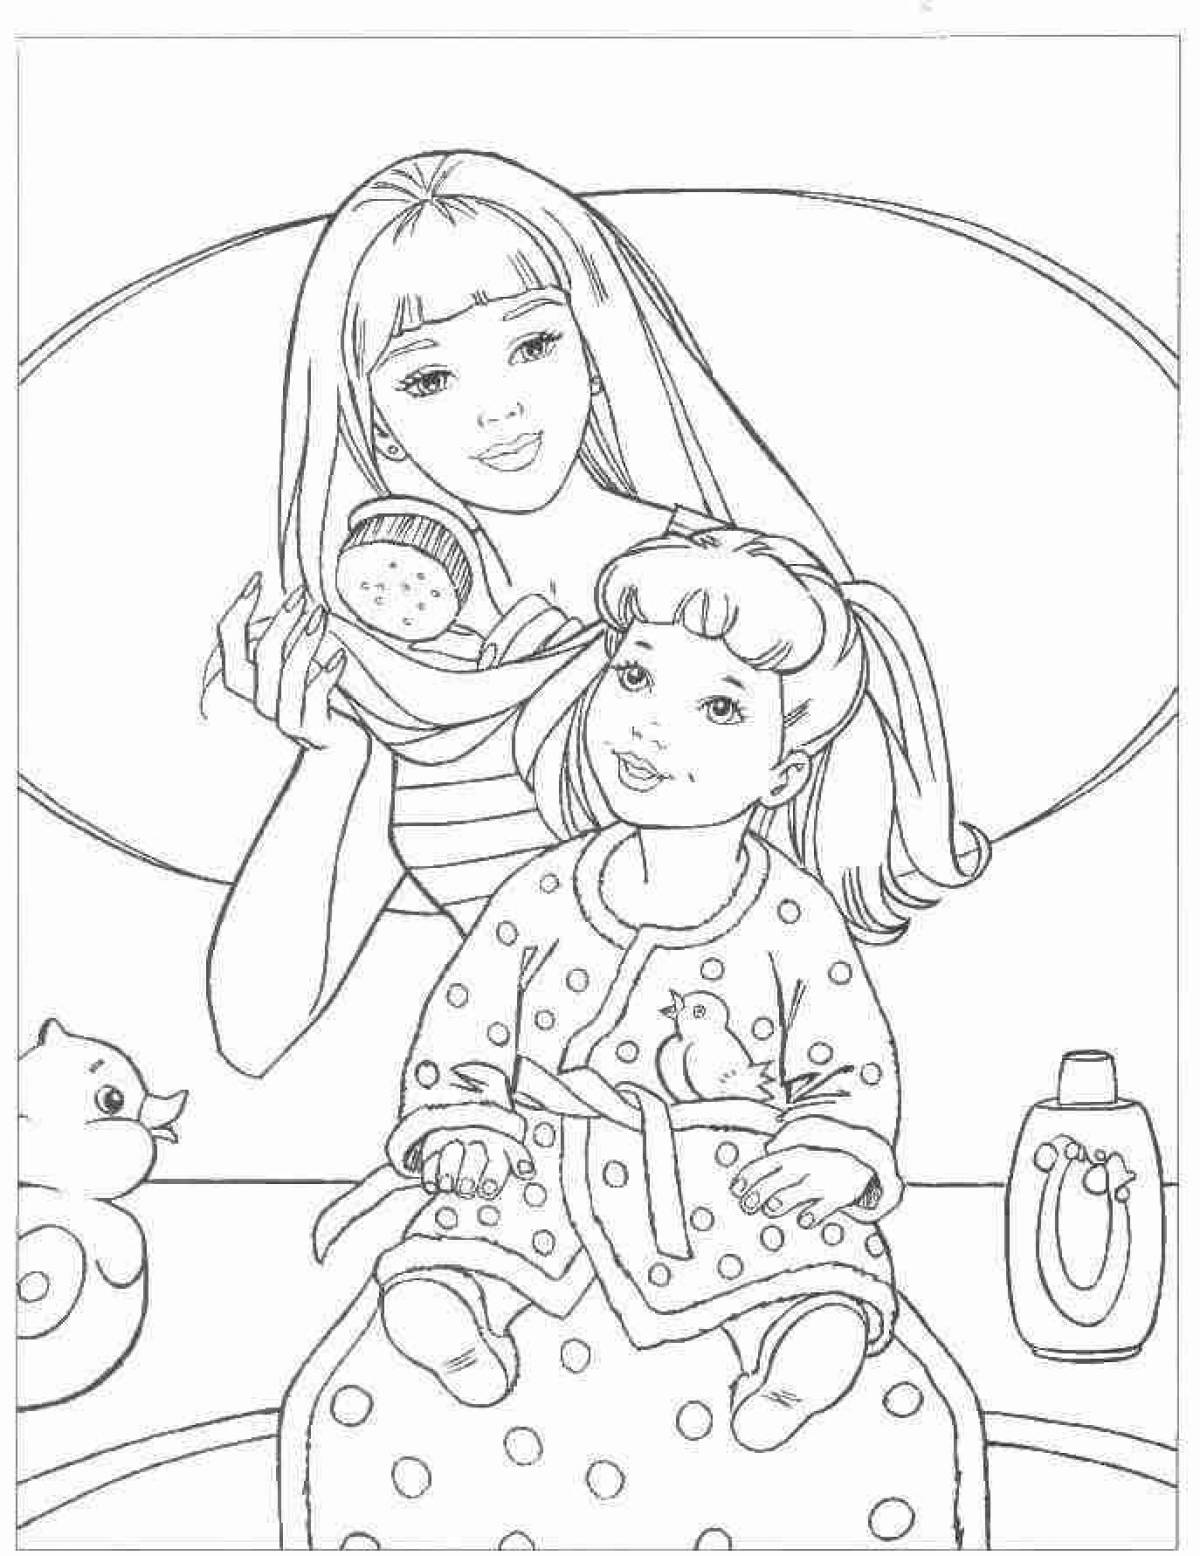 Coloring page cheerful mother